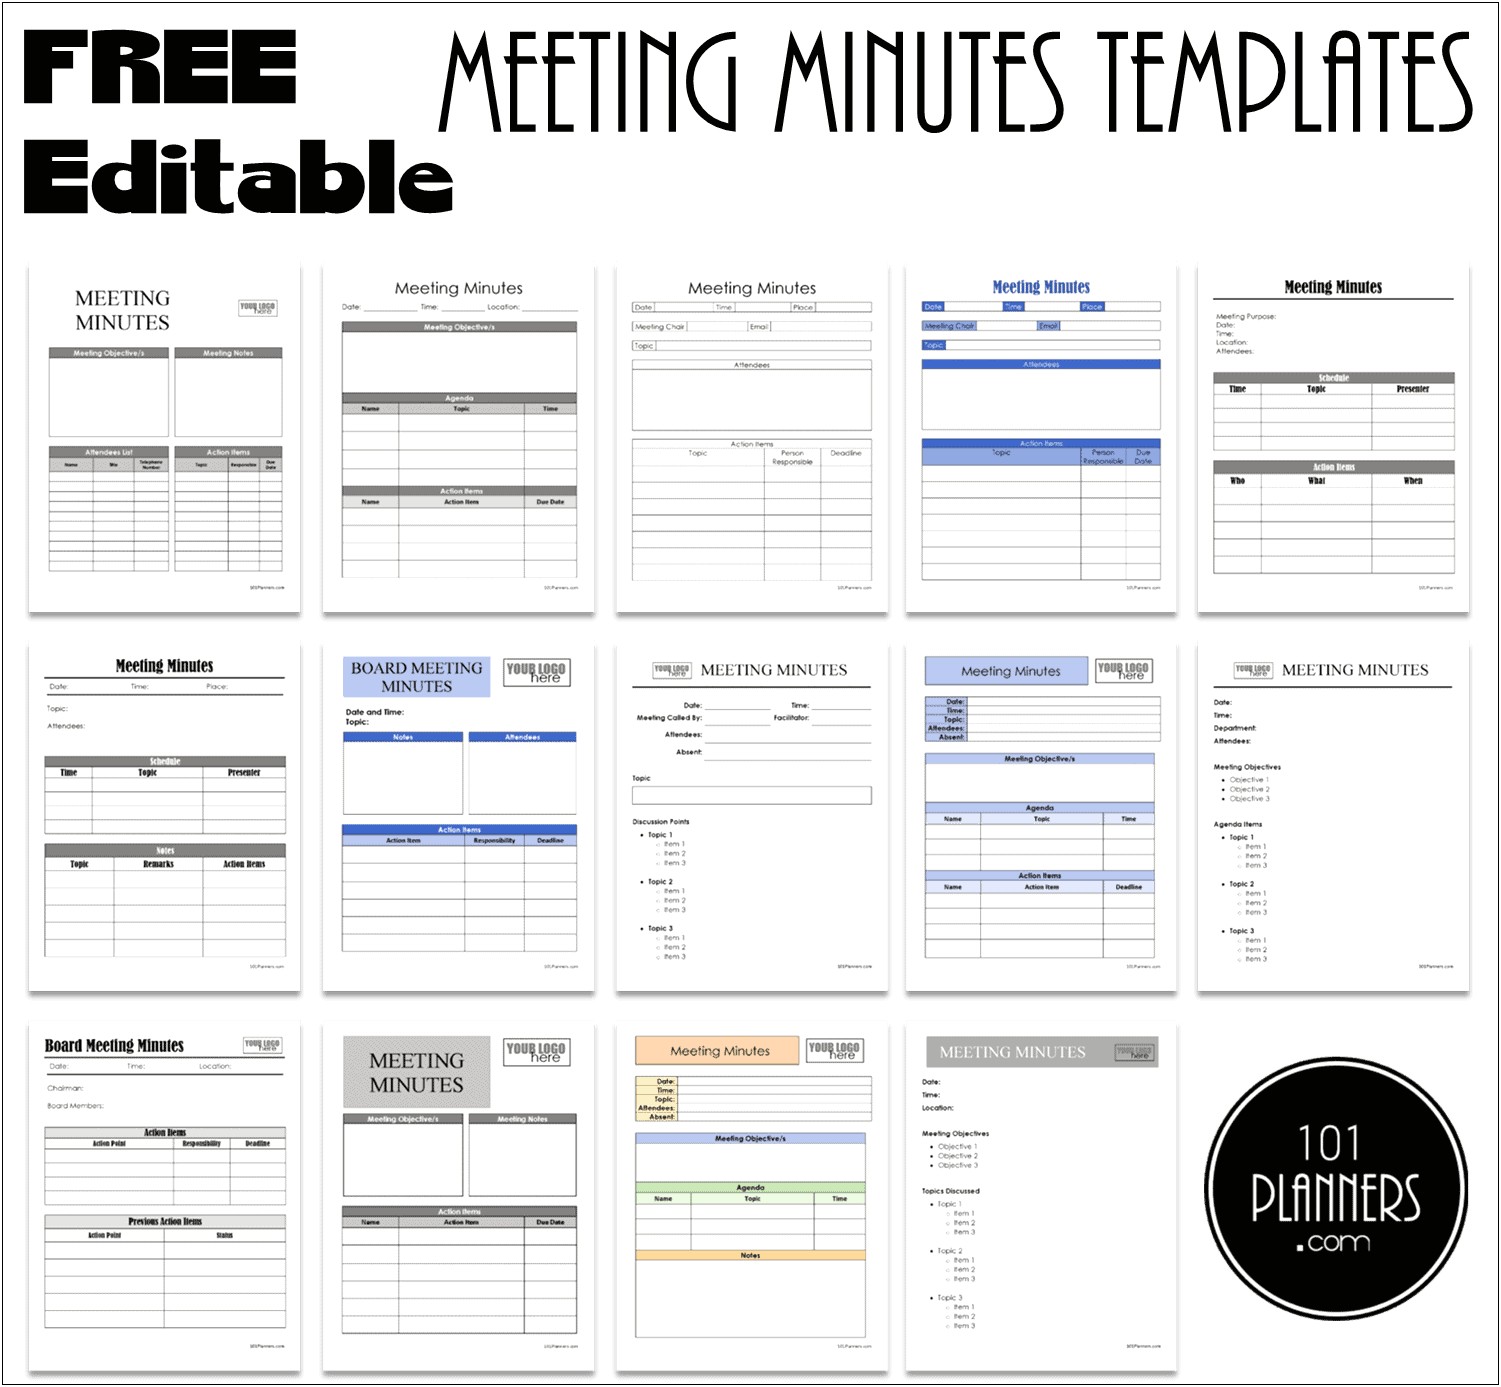 free-meeting-agenda-and-minutes-template-resume-example-gallery